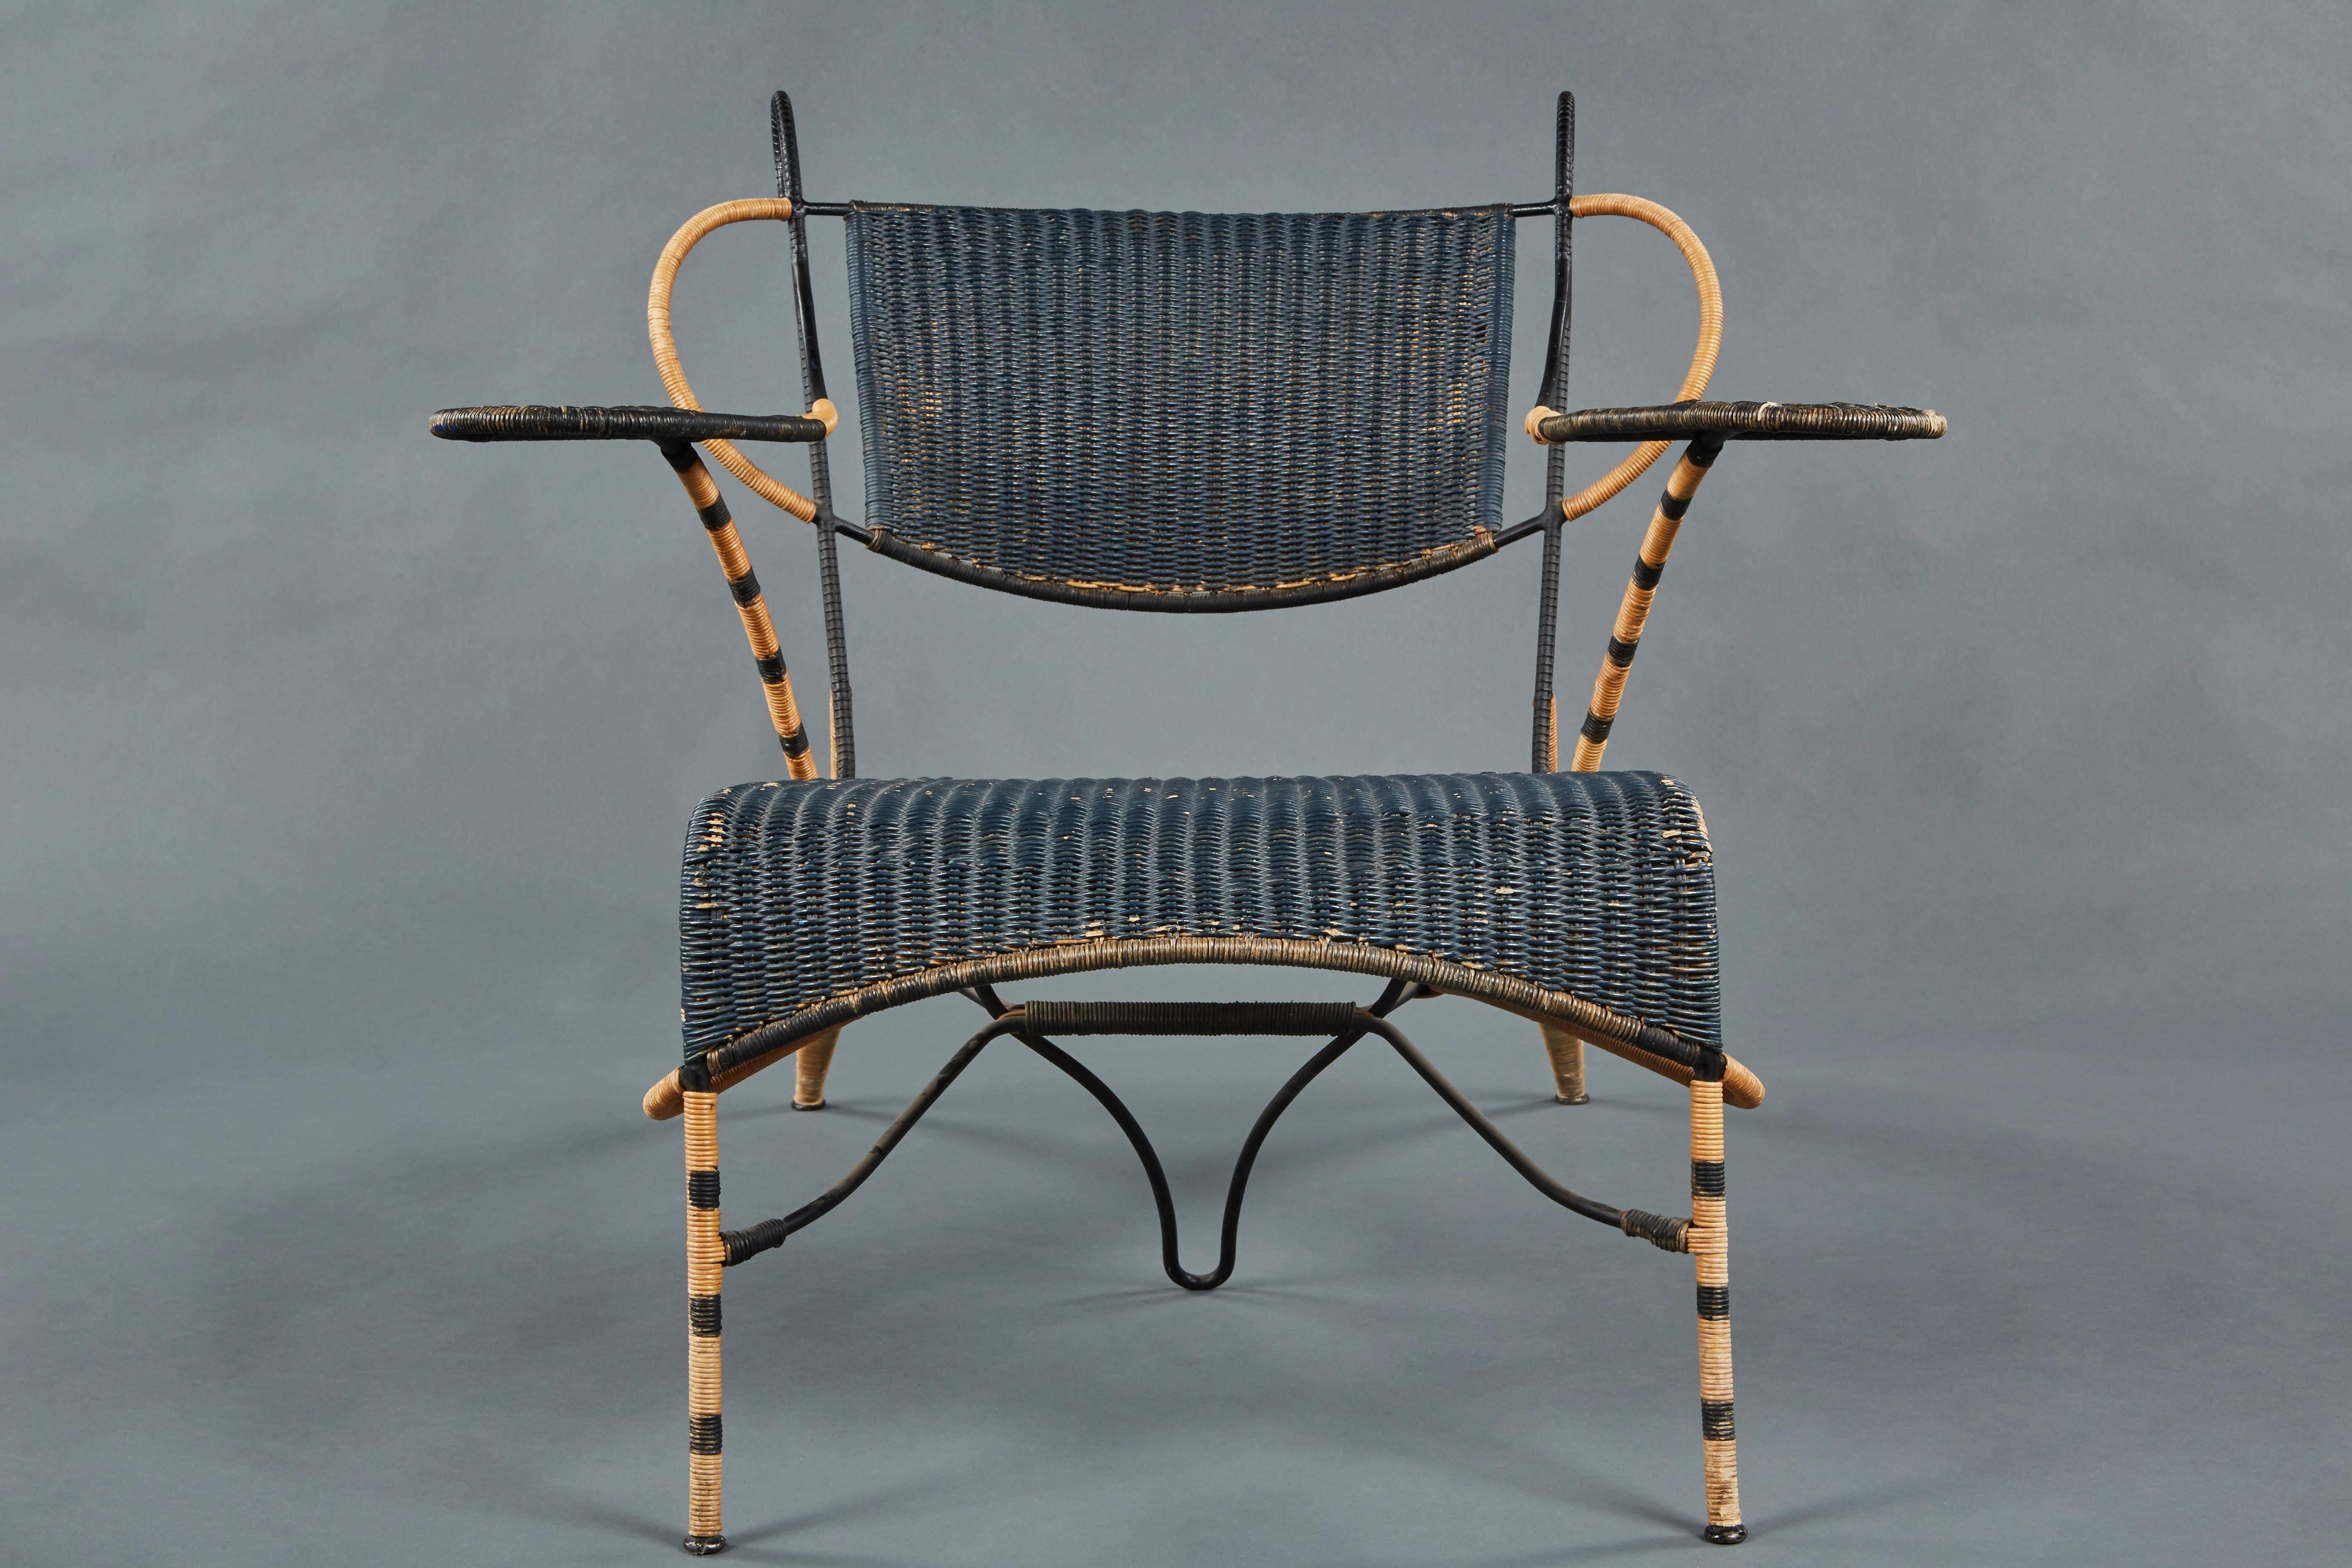 A unique and sculptural Italian black and natural wicker chair over a steel frame. Its flamboyant elements contributing to great movement and flair.